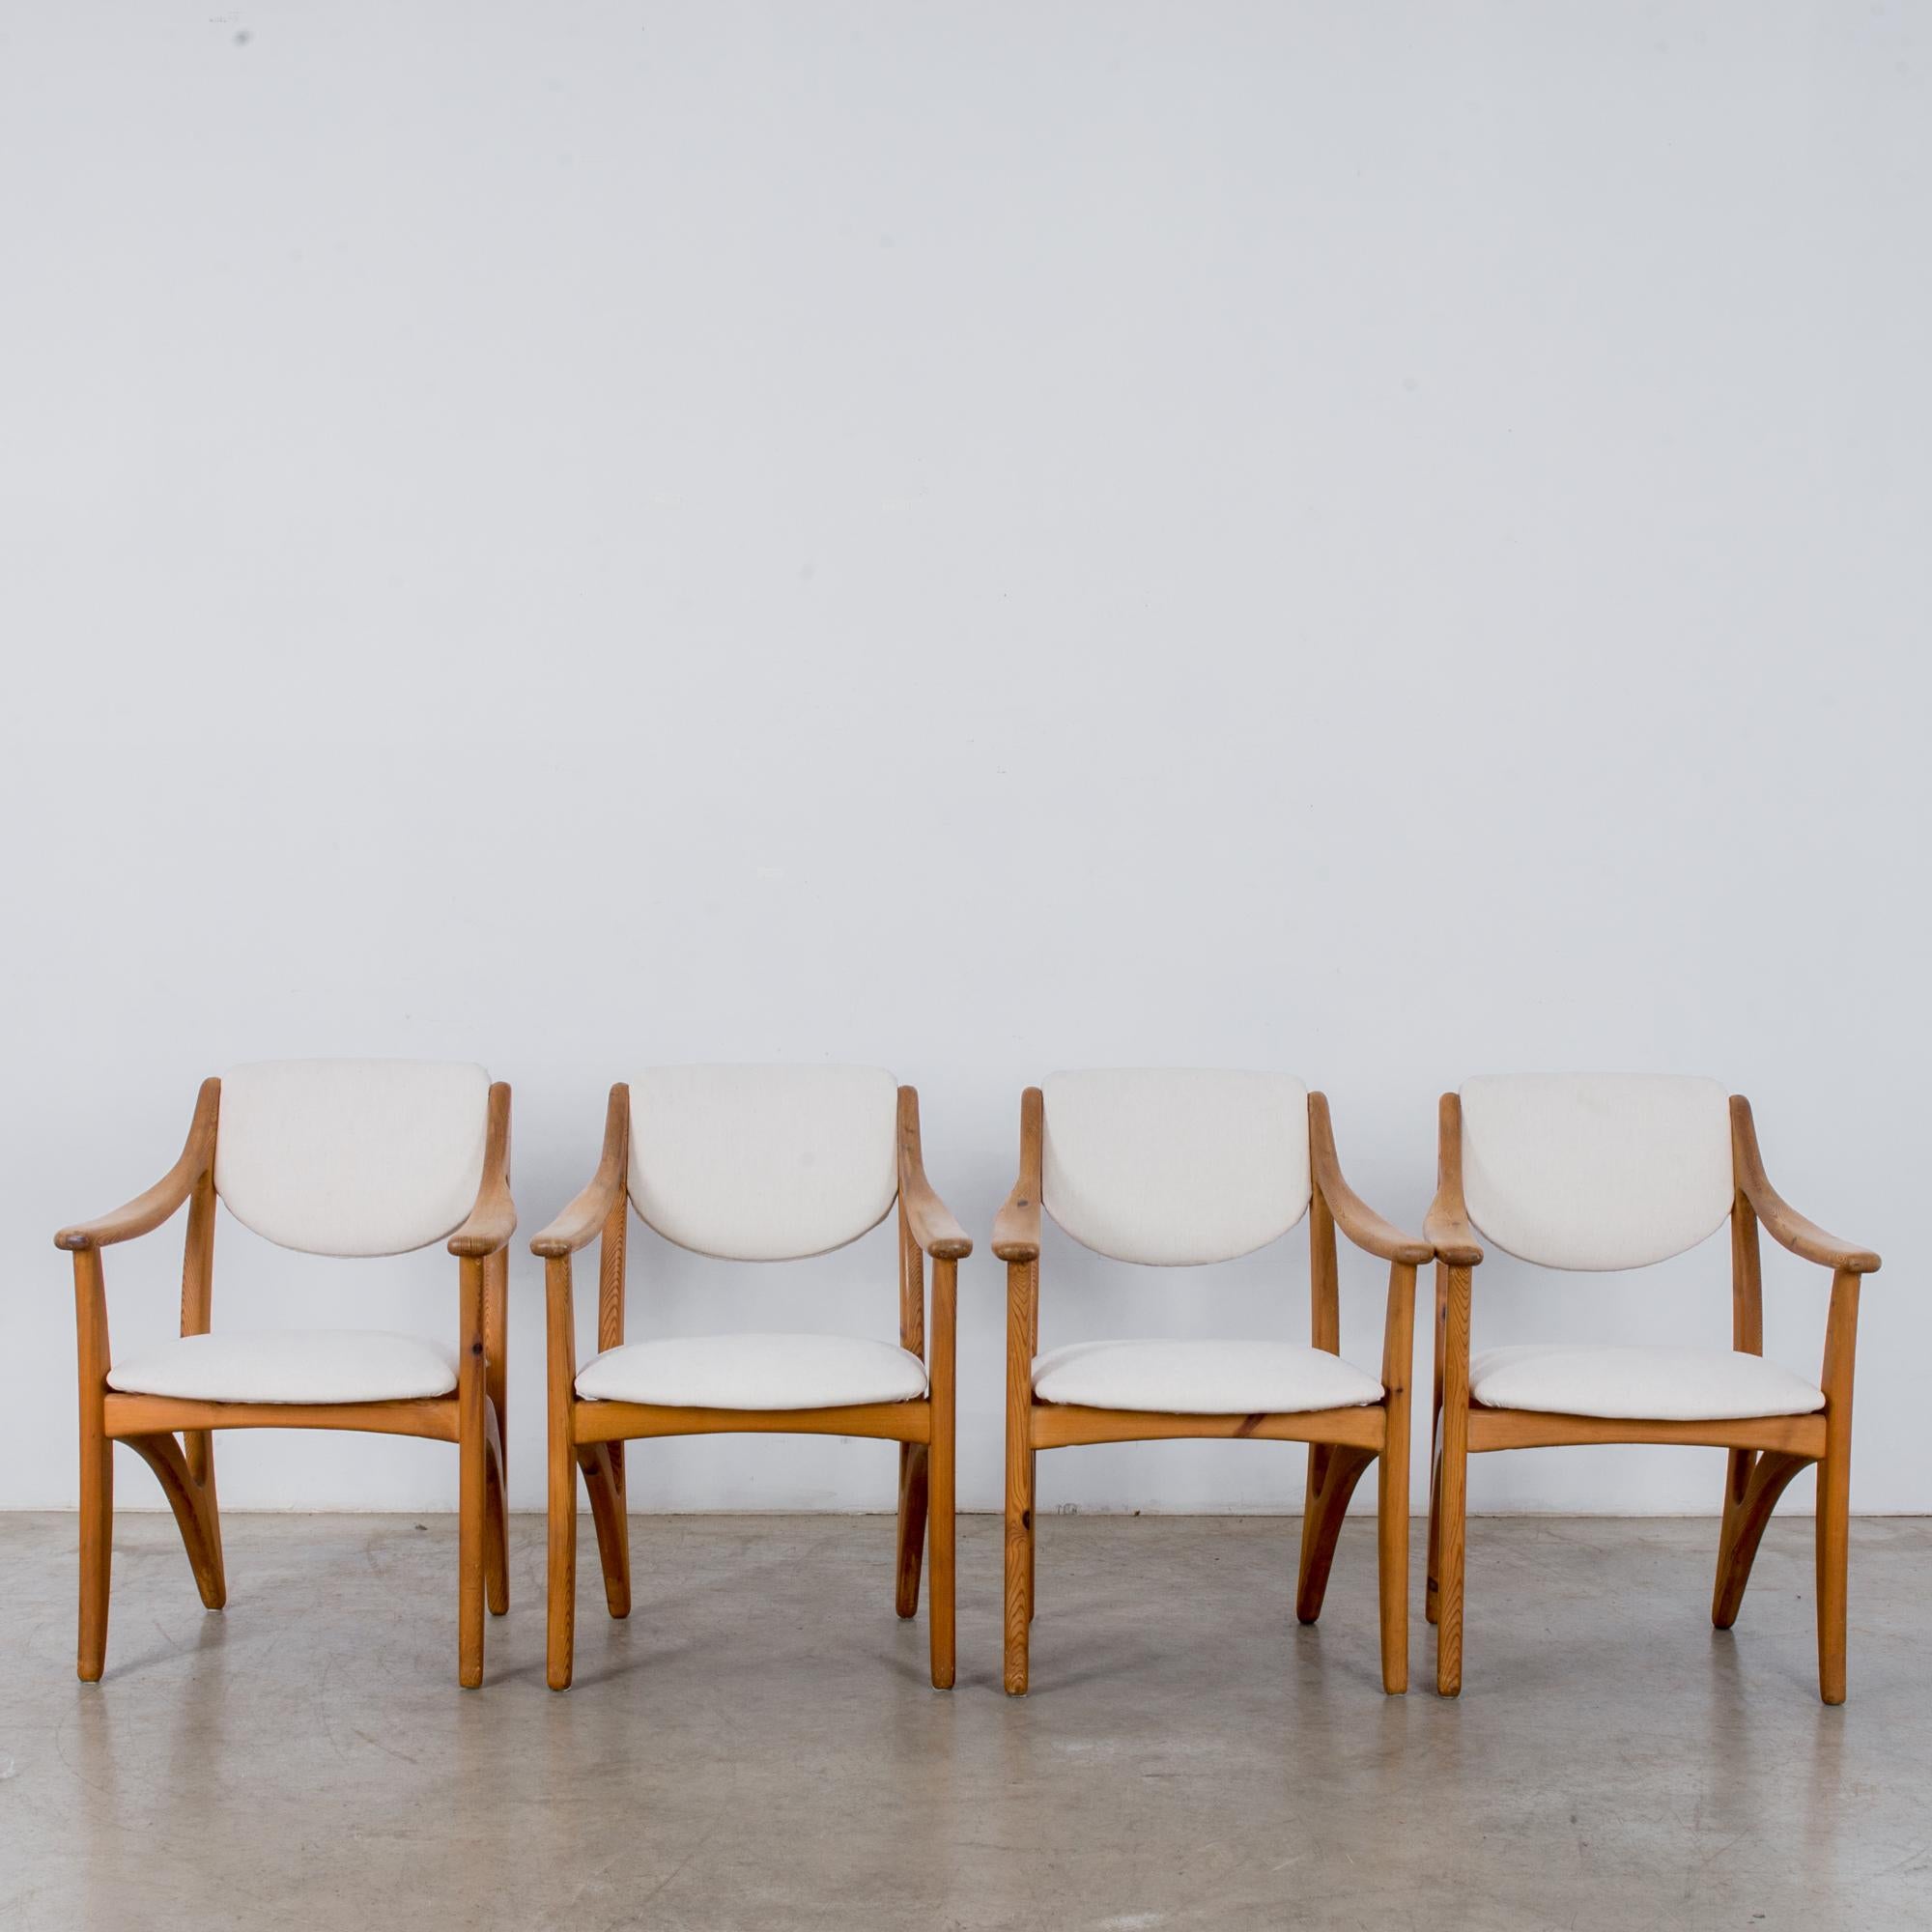 This set of armchairs designed by Arne Vodder was made in Denmark, circa 1960. The upholstered cream backrests and seats complement the beautiful grain of the light, polished wood. The armrests and side stretchers of this timeless and elegant set of